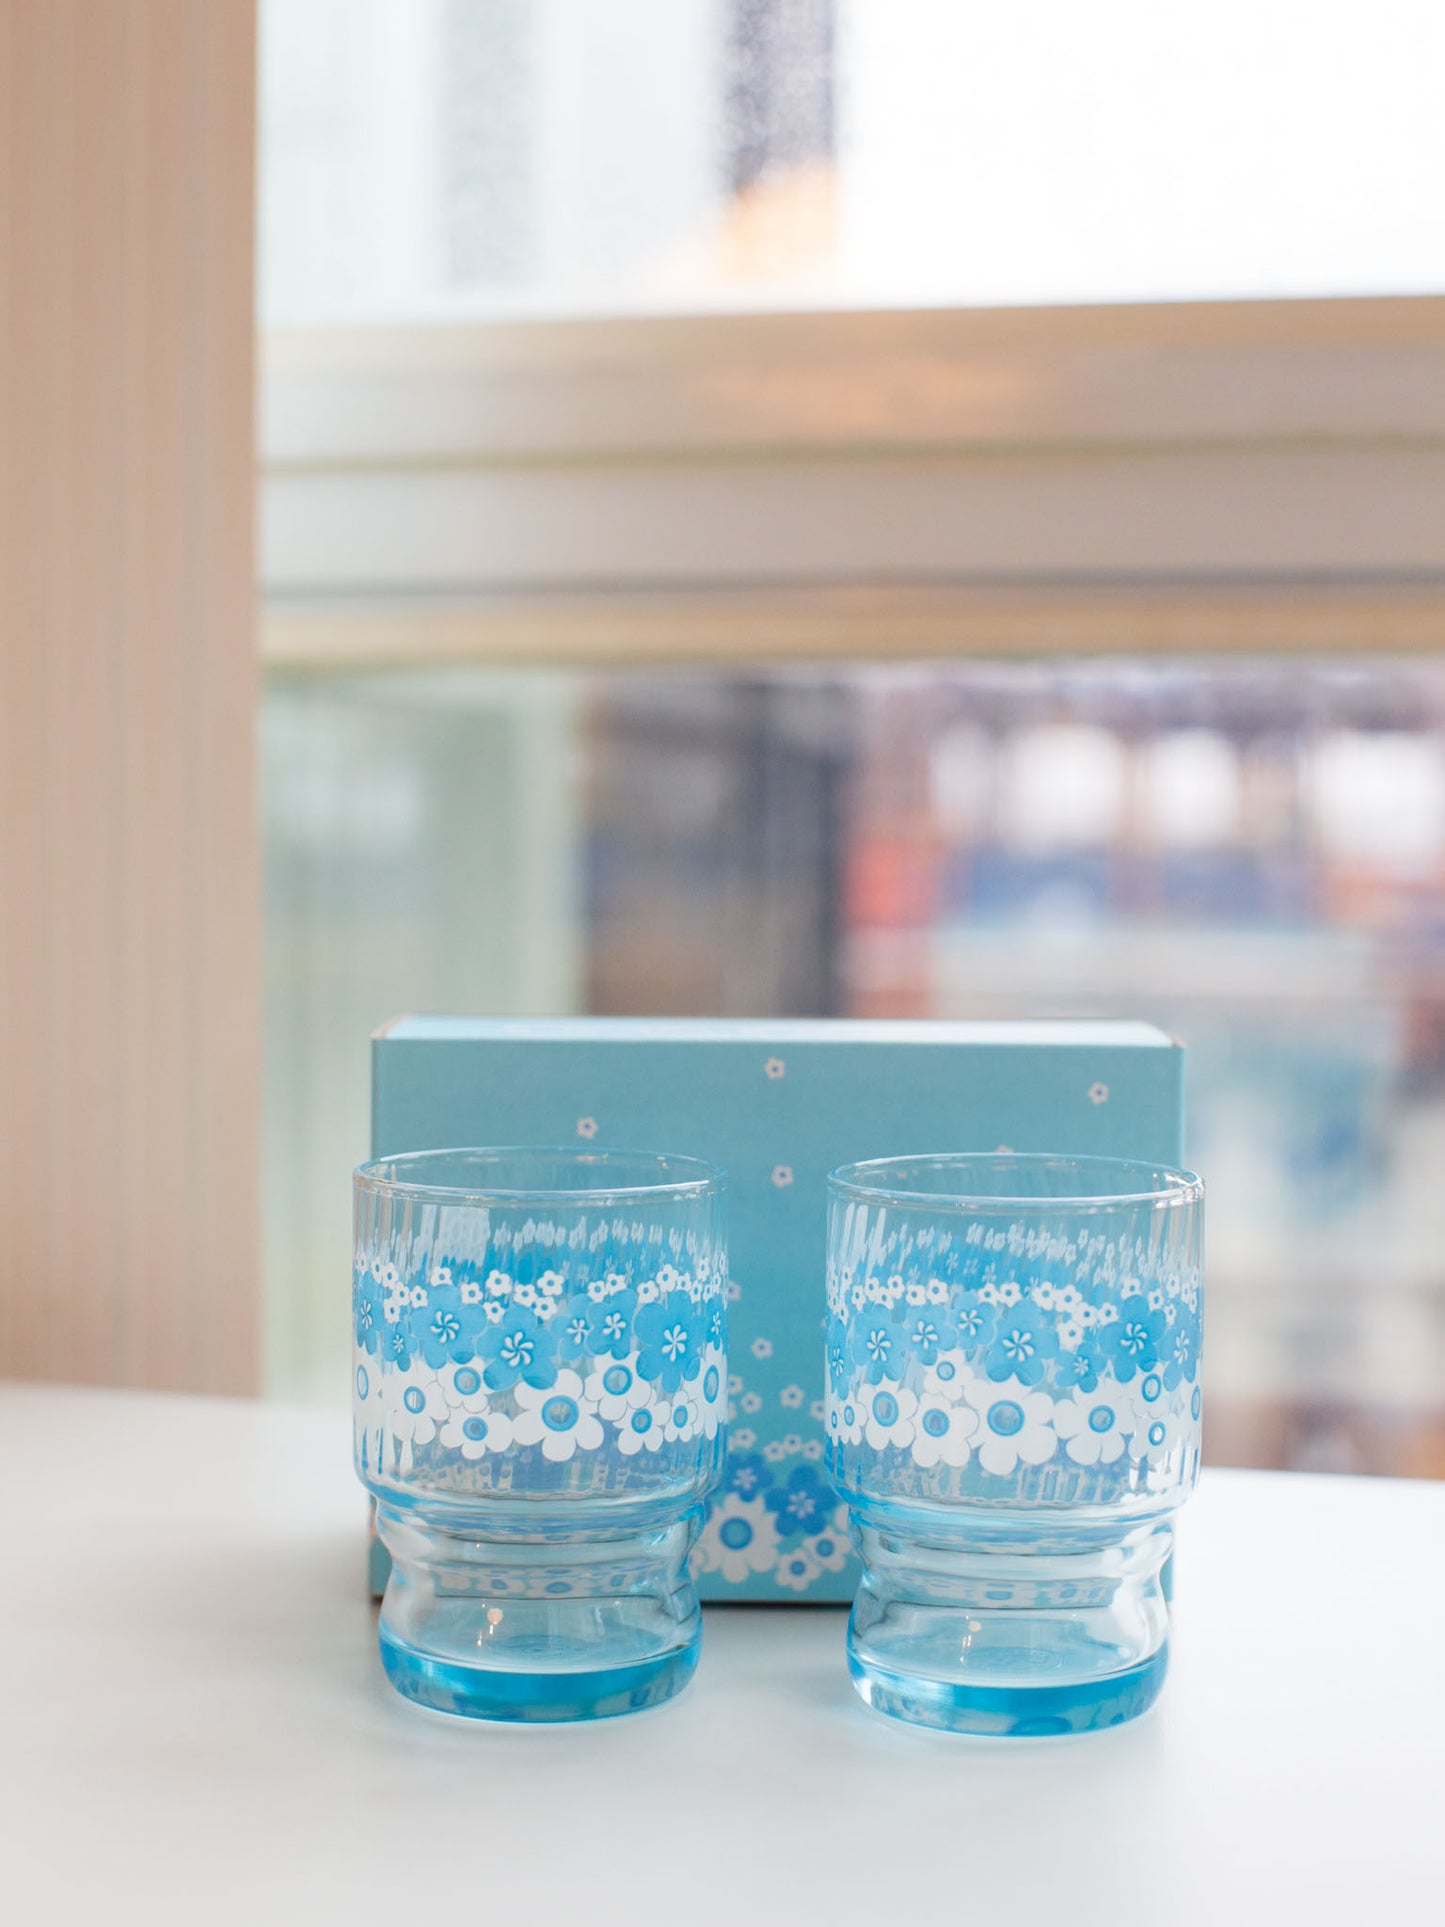 Aderia Set of 2 Stacking Glasses - Blue & White Flowers